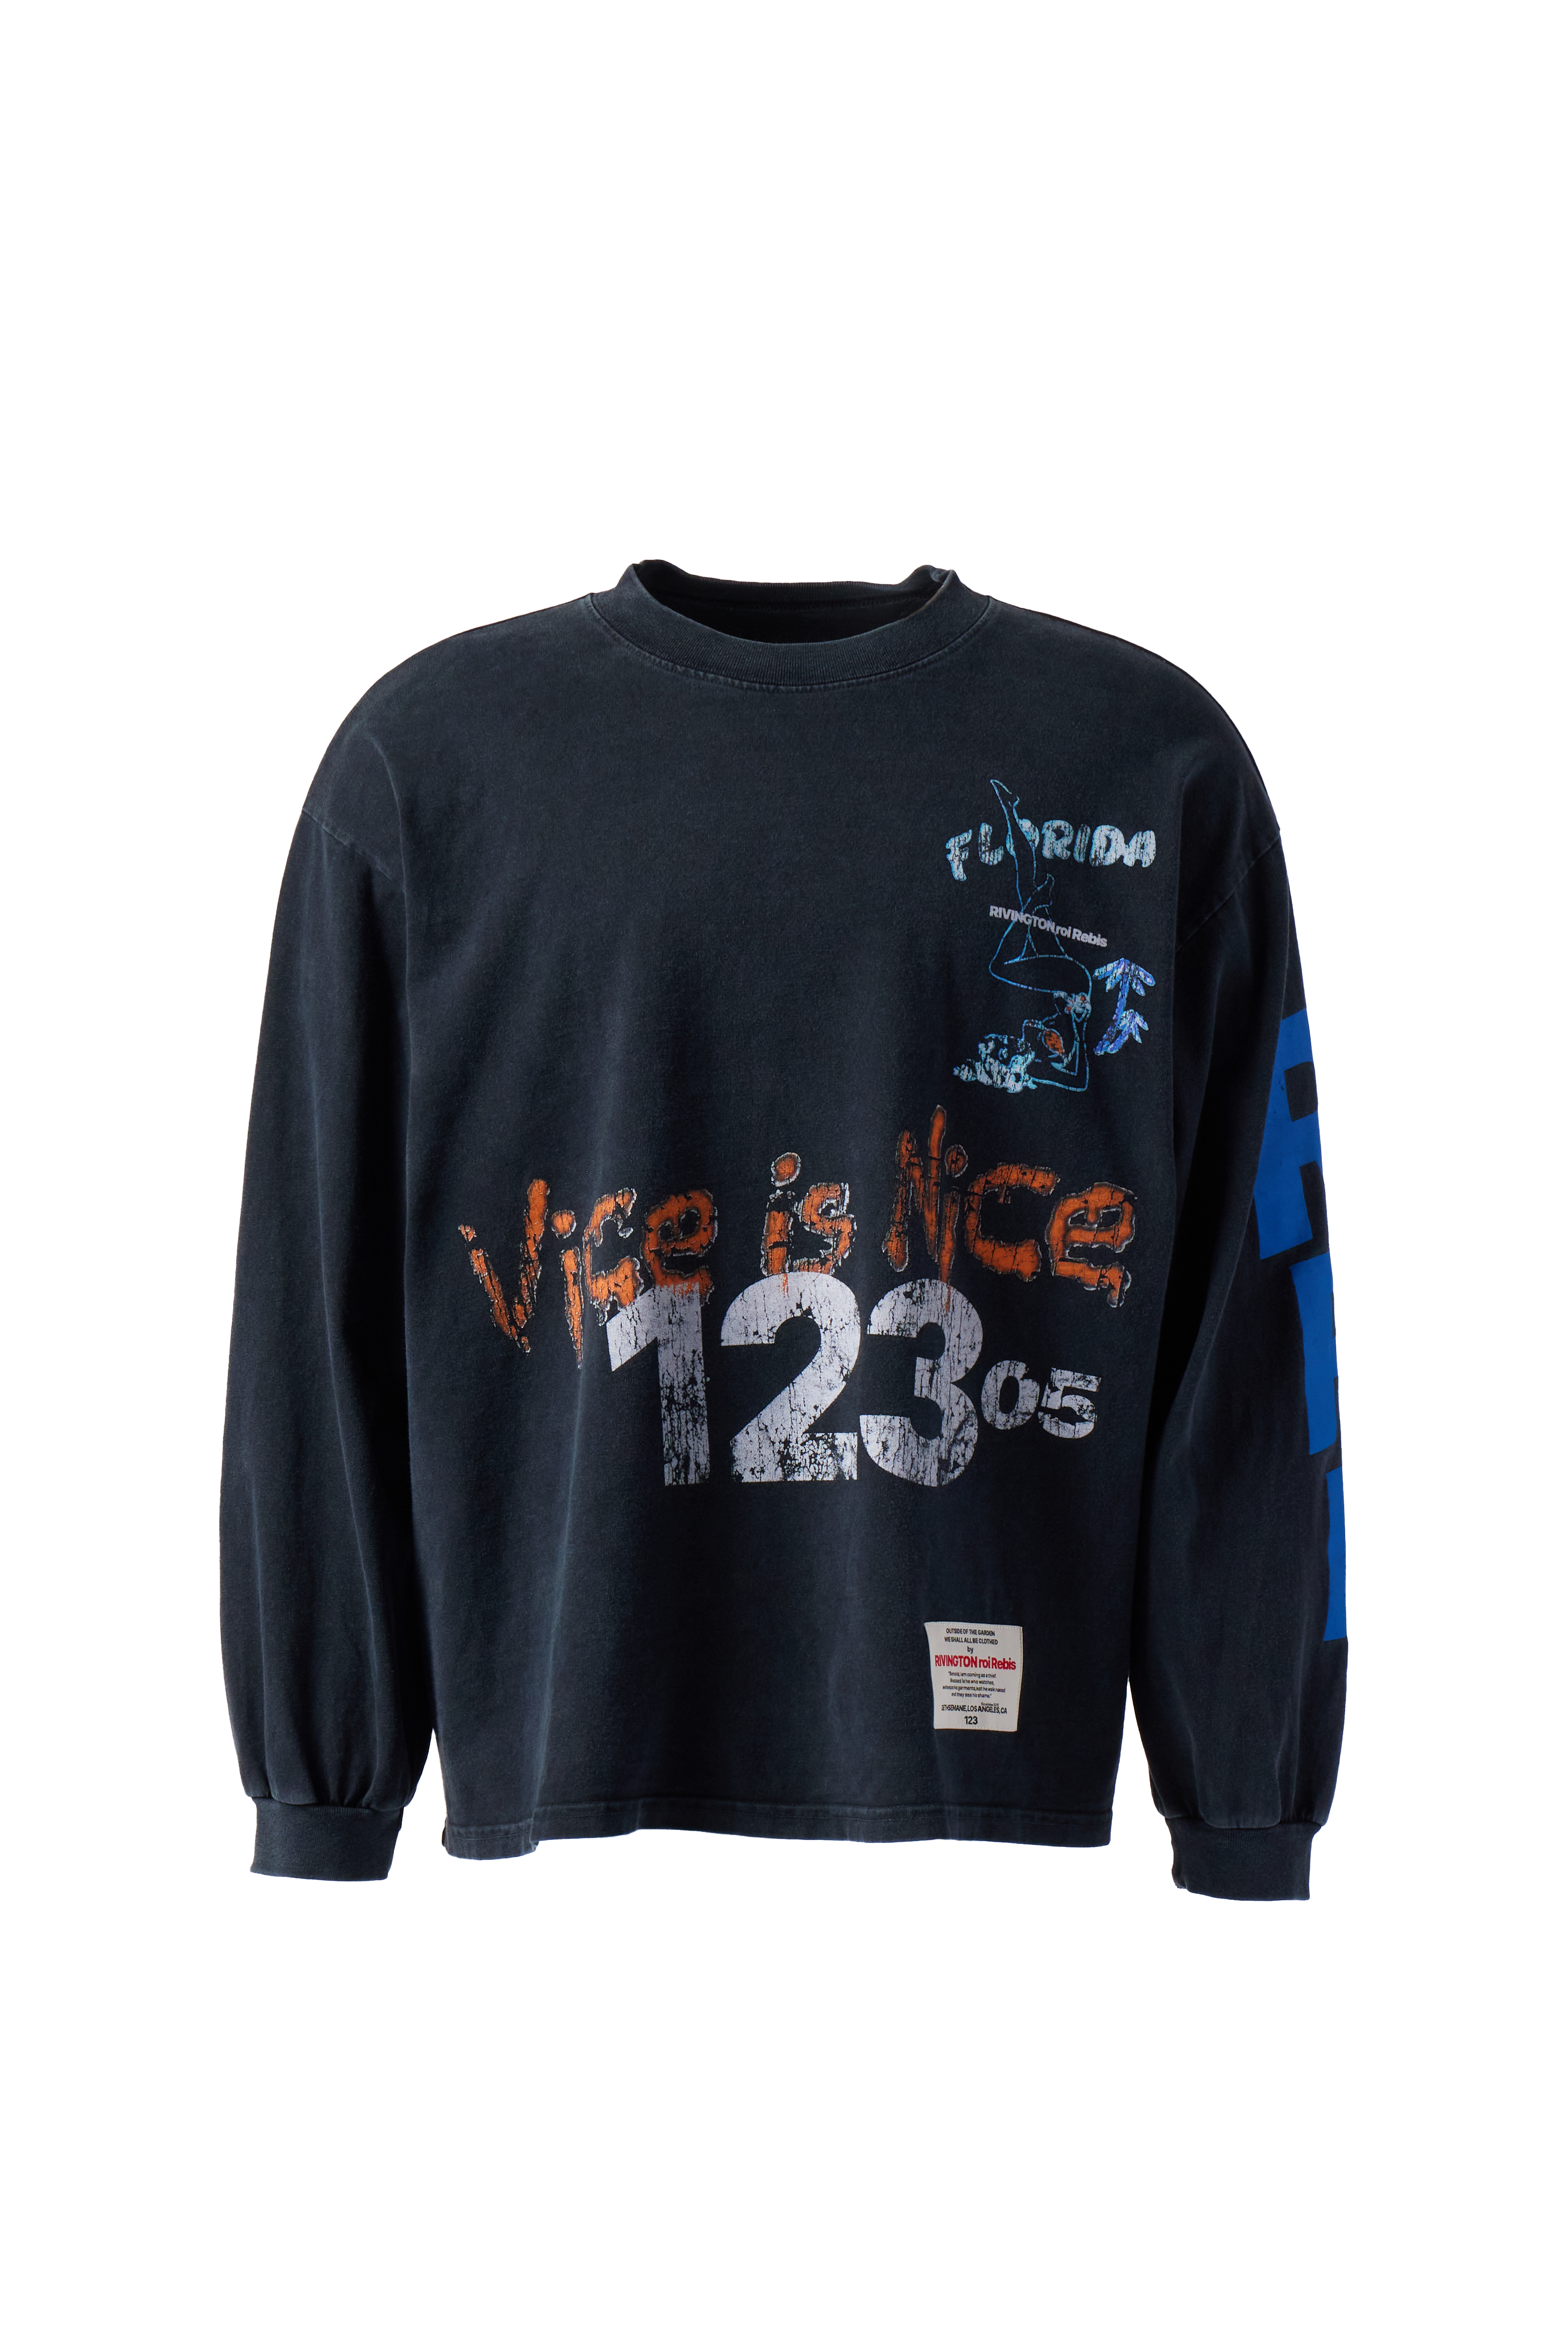 RRR123 - Vice is Nice L/S Tee product image